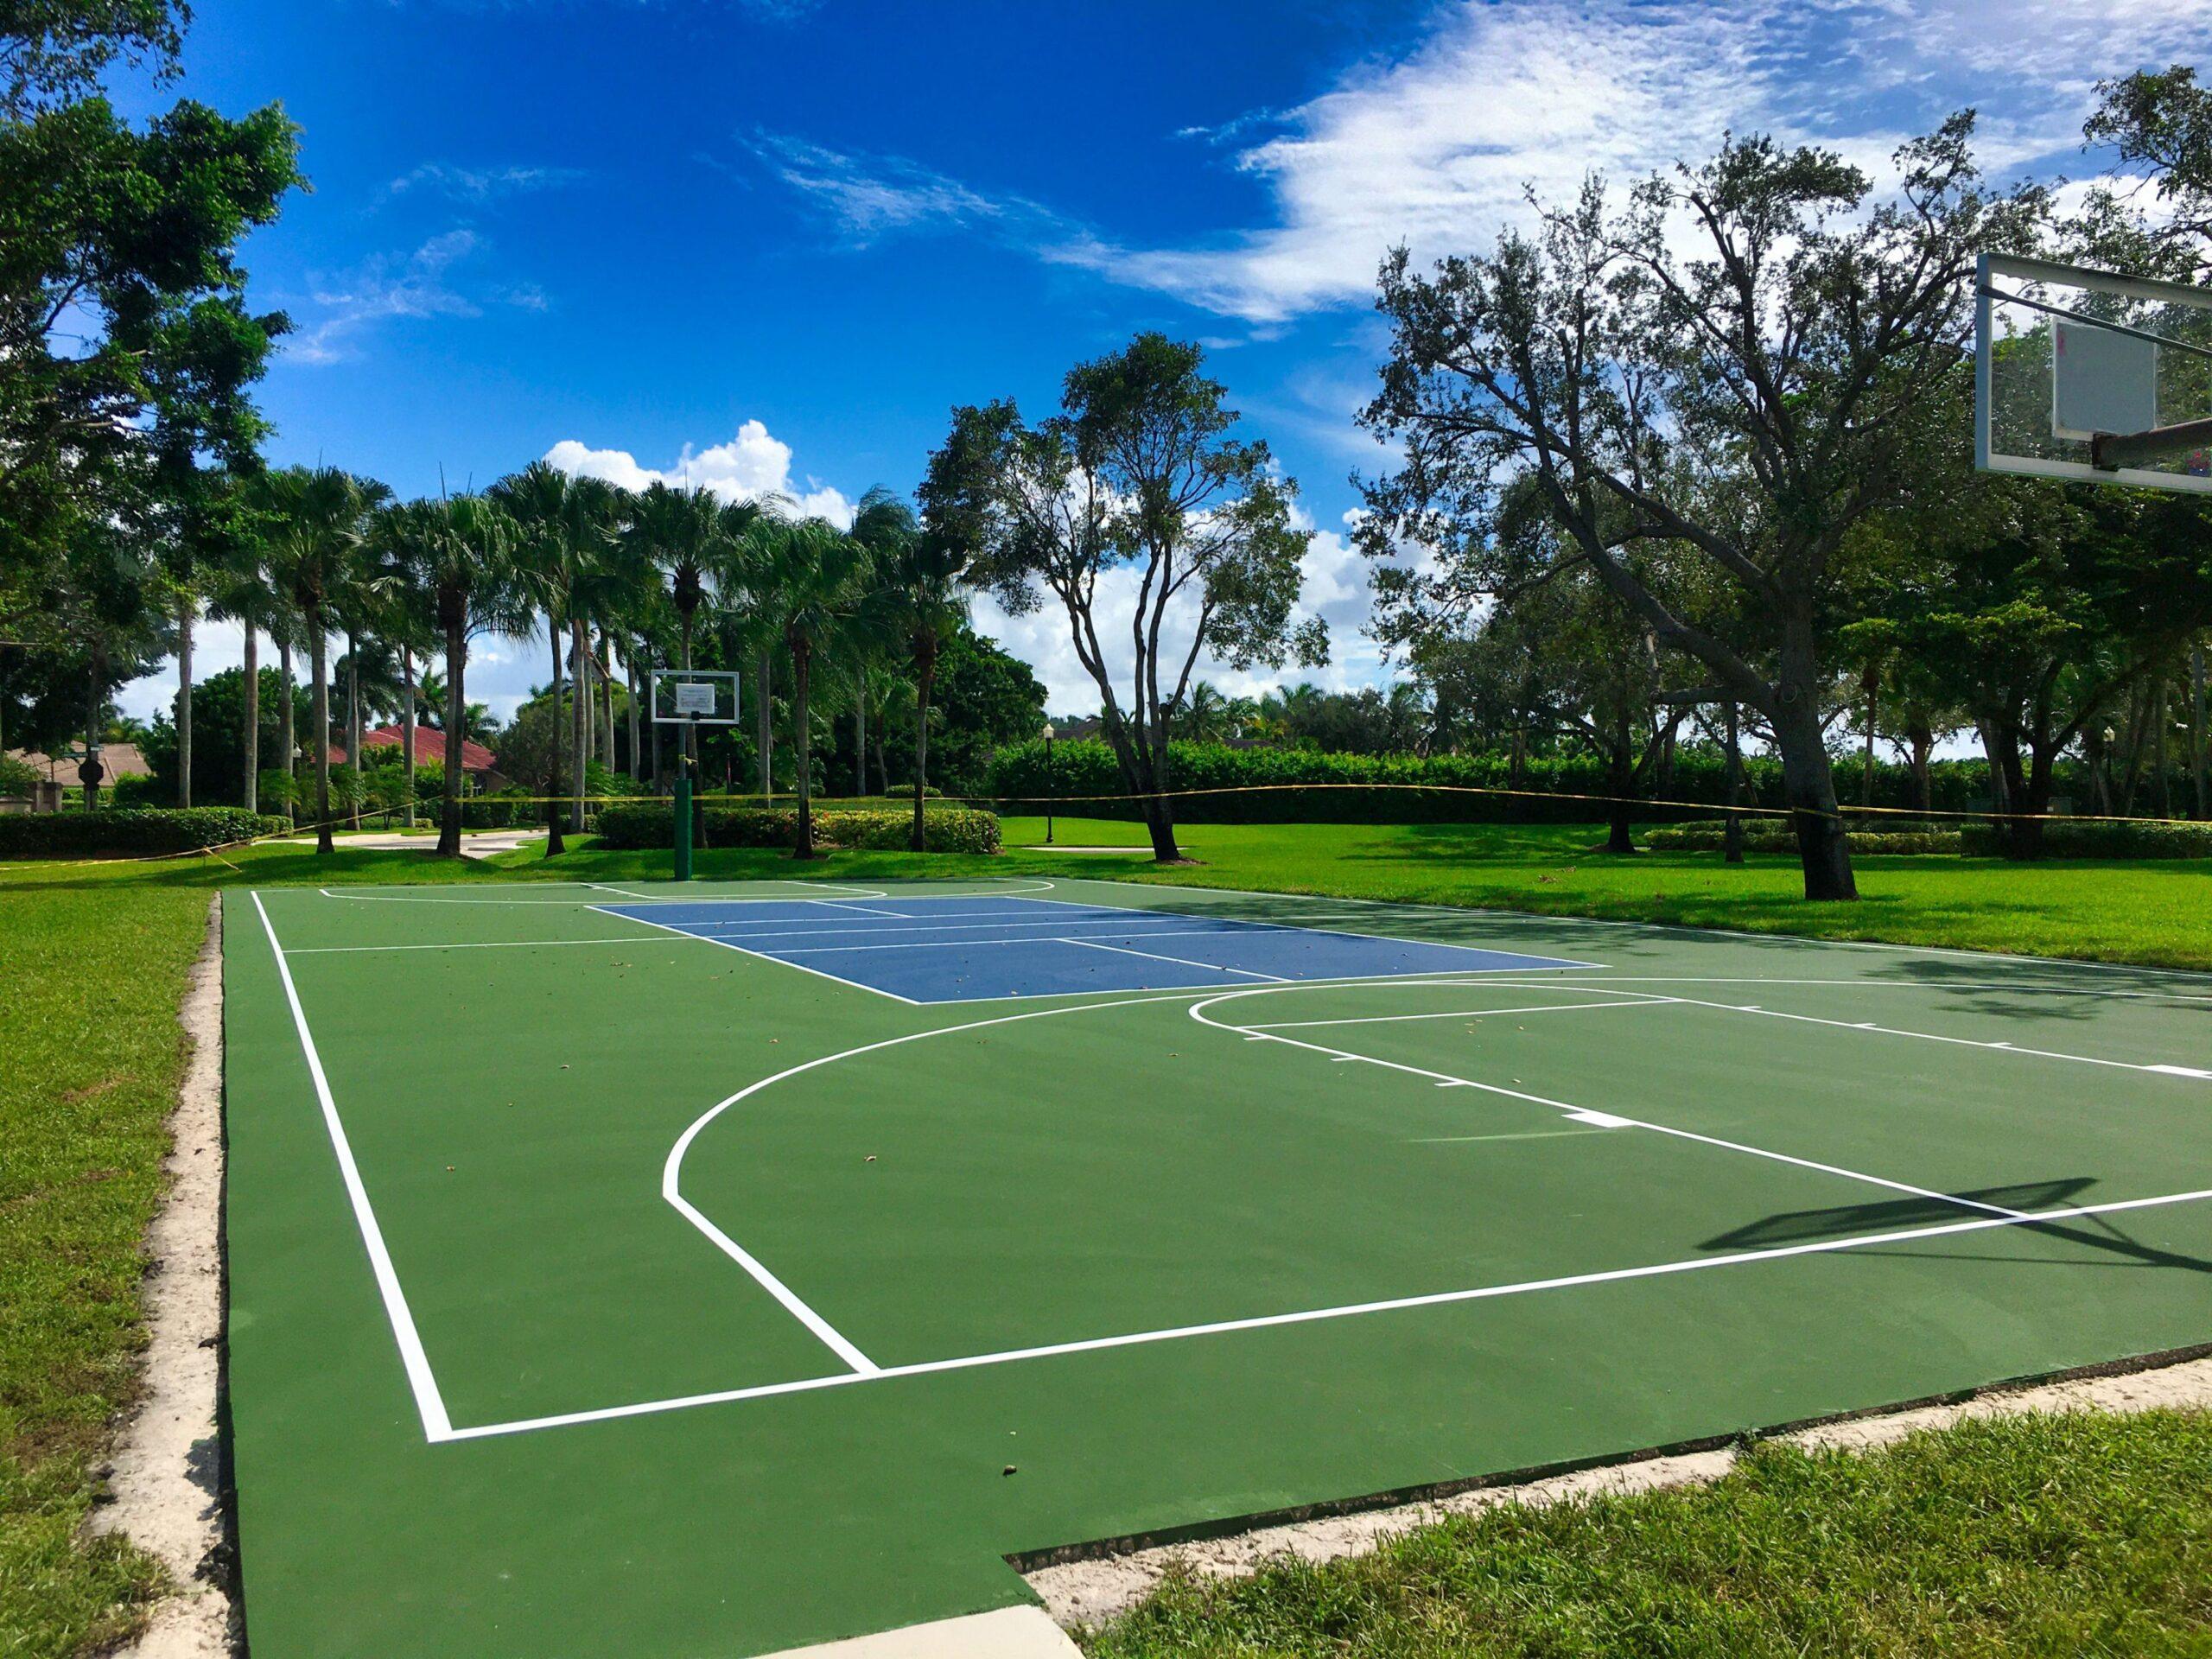 The Landings Armor Courts